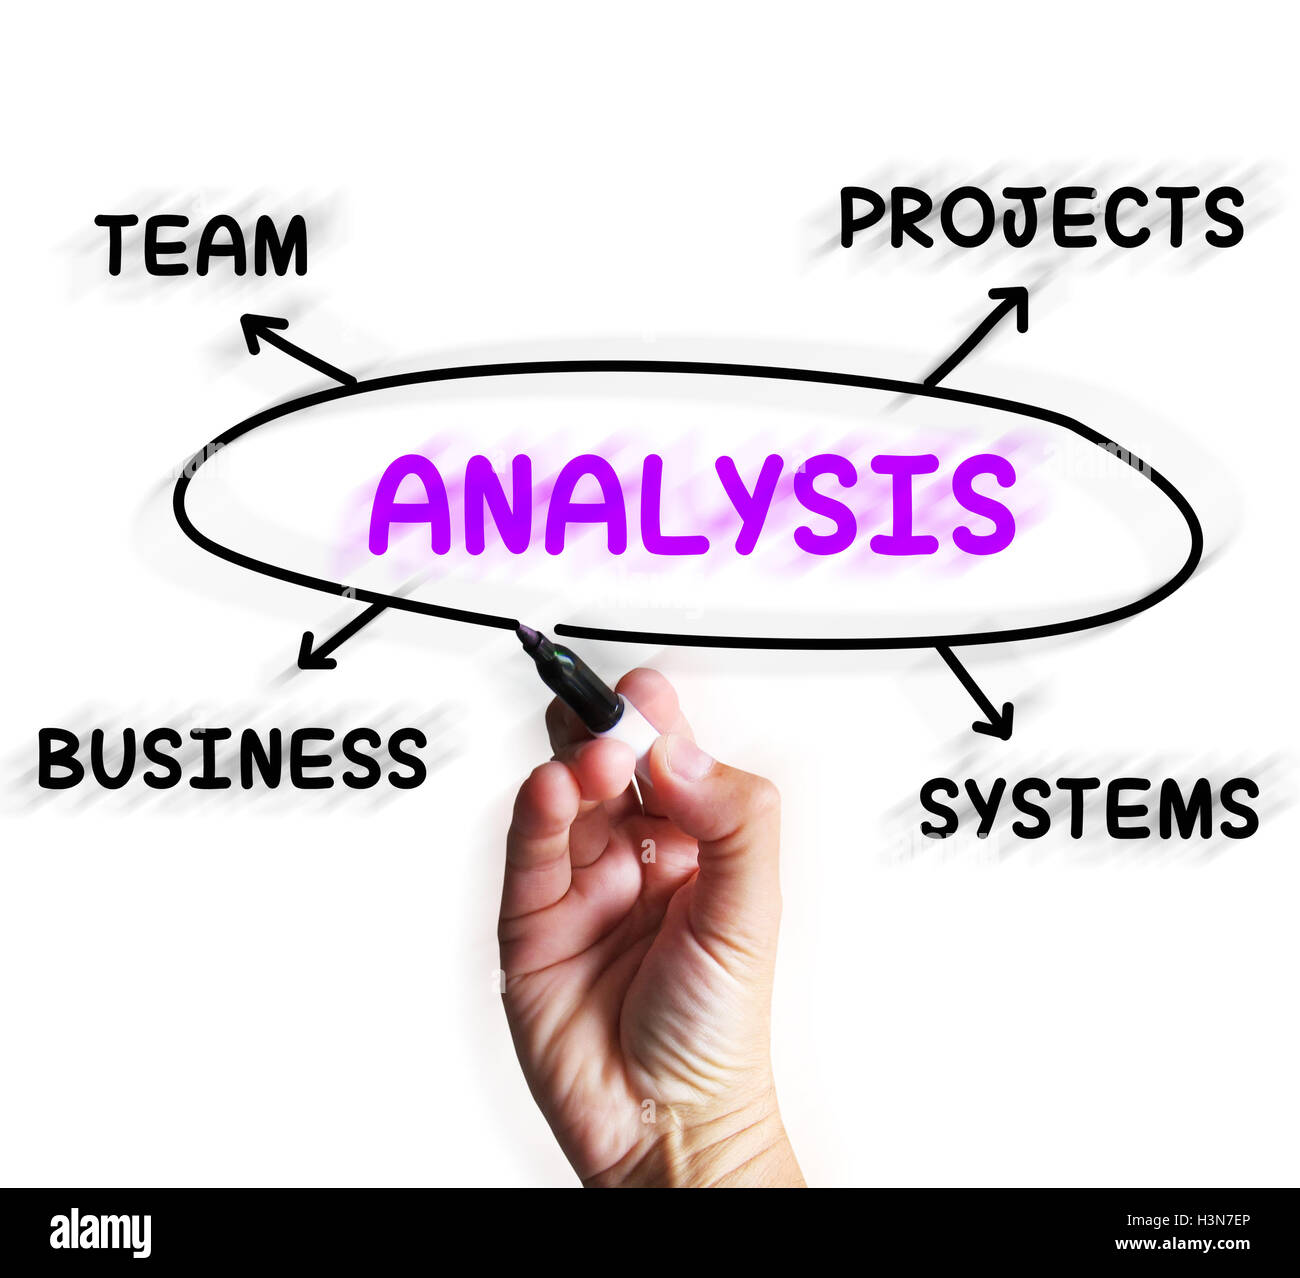 Analysis Diagram Displays Examining Projects And Systems Stock Photo